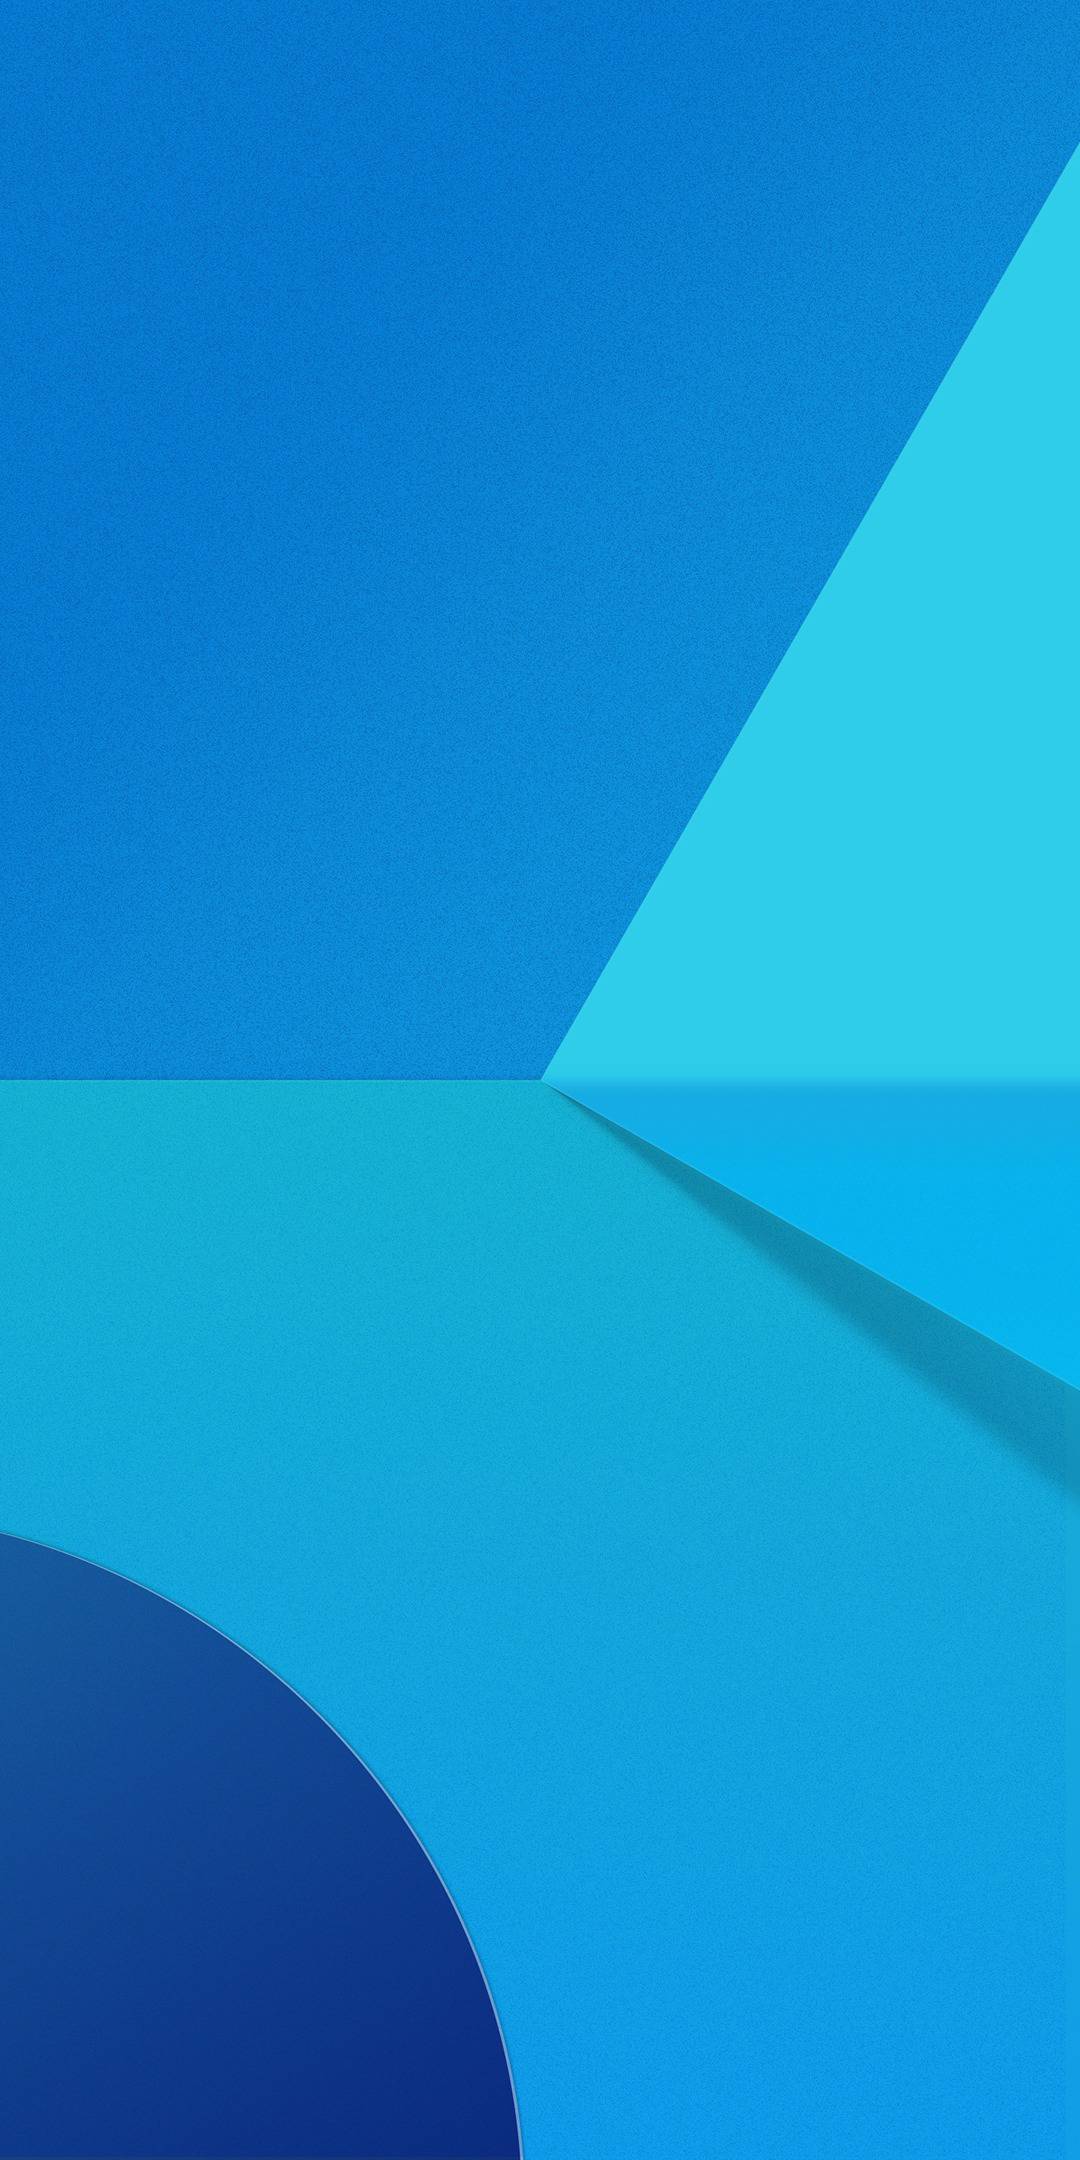 android n stock wallpaper,blue,aqua,daytime,azure,turquoise